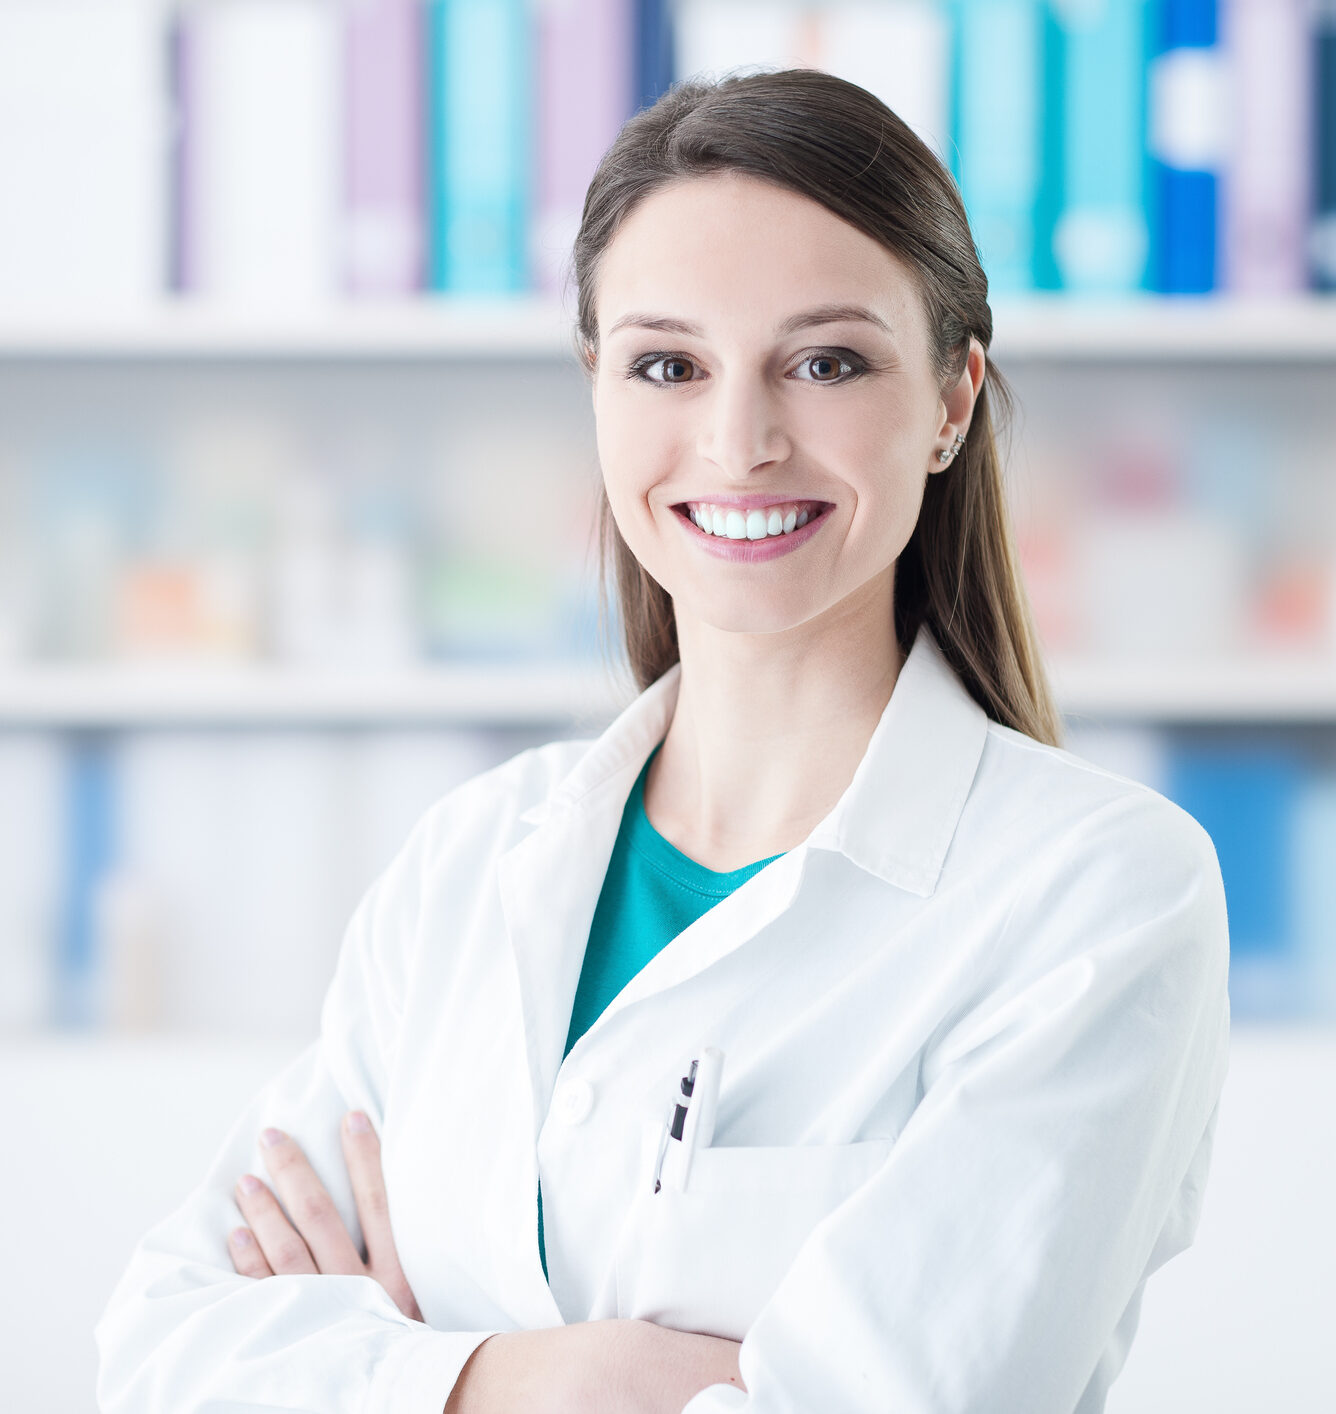 Confident smiling female doctor posing in the office, healthcare concept